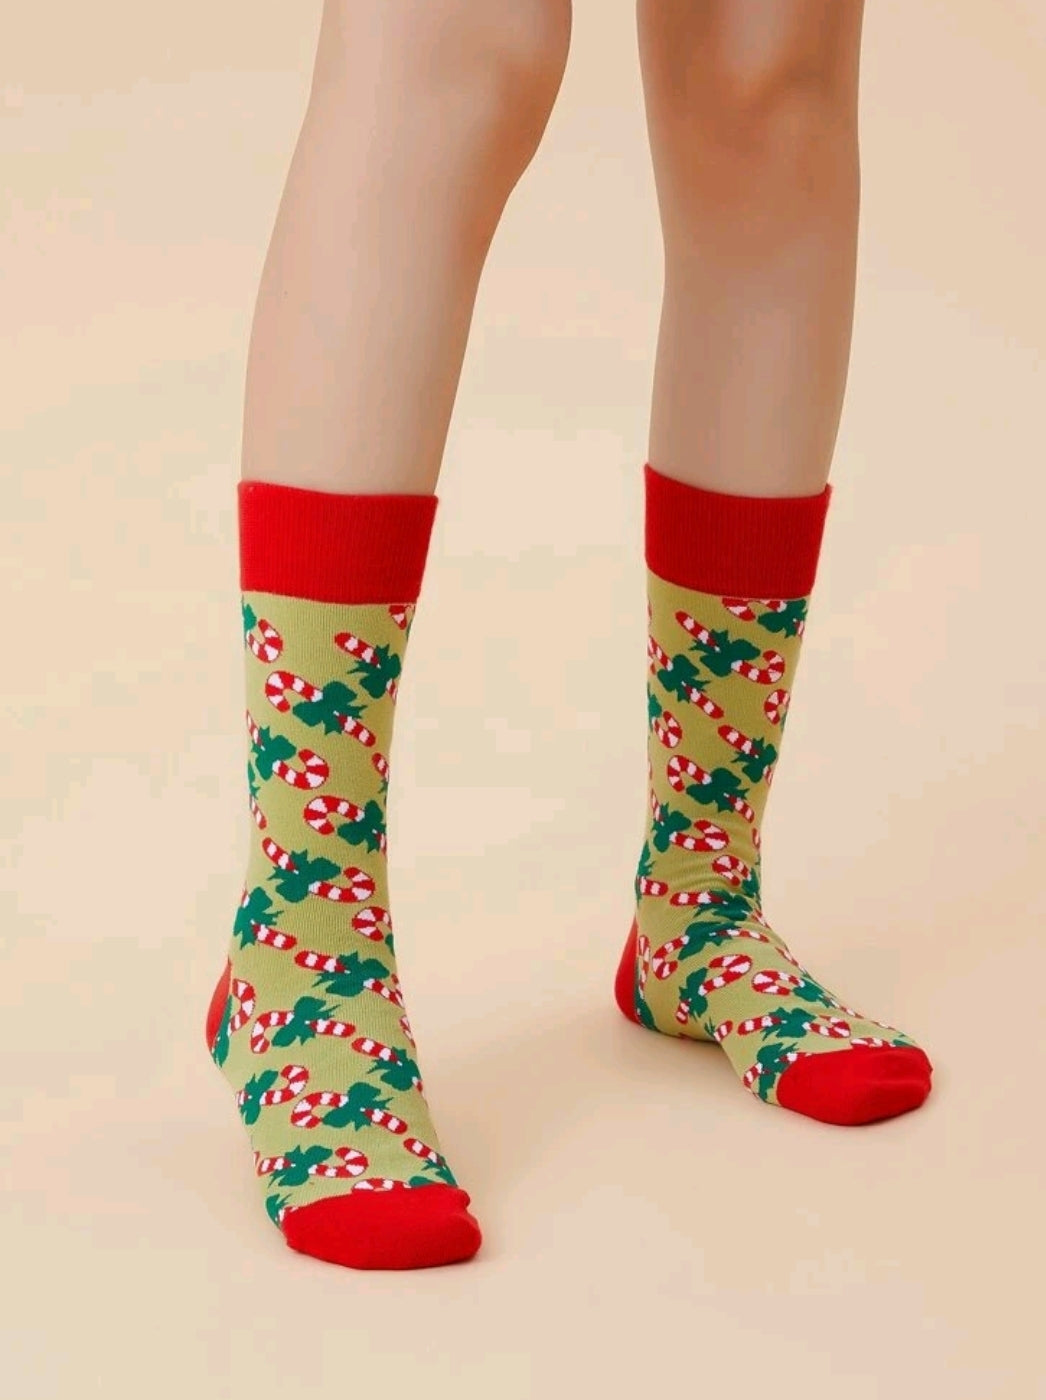  One-size boys and girls Xmas socks - Lovely comfy gift idea - wear this cute pair of socks (with candy sweets design) during the holiday season, your family and friends will love it. Unisex accessory shipped in a gift bag. Color: Multicolour Pattern Type: Christmas